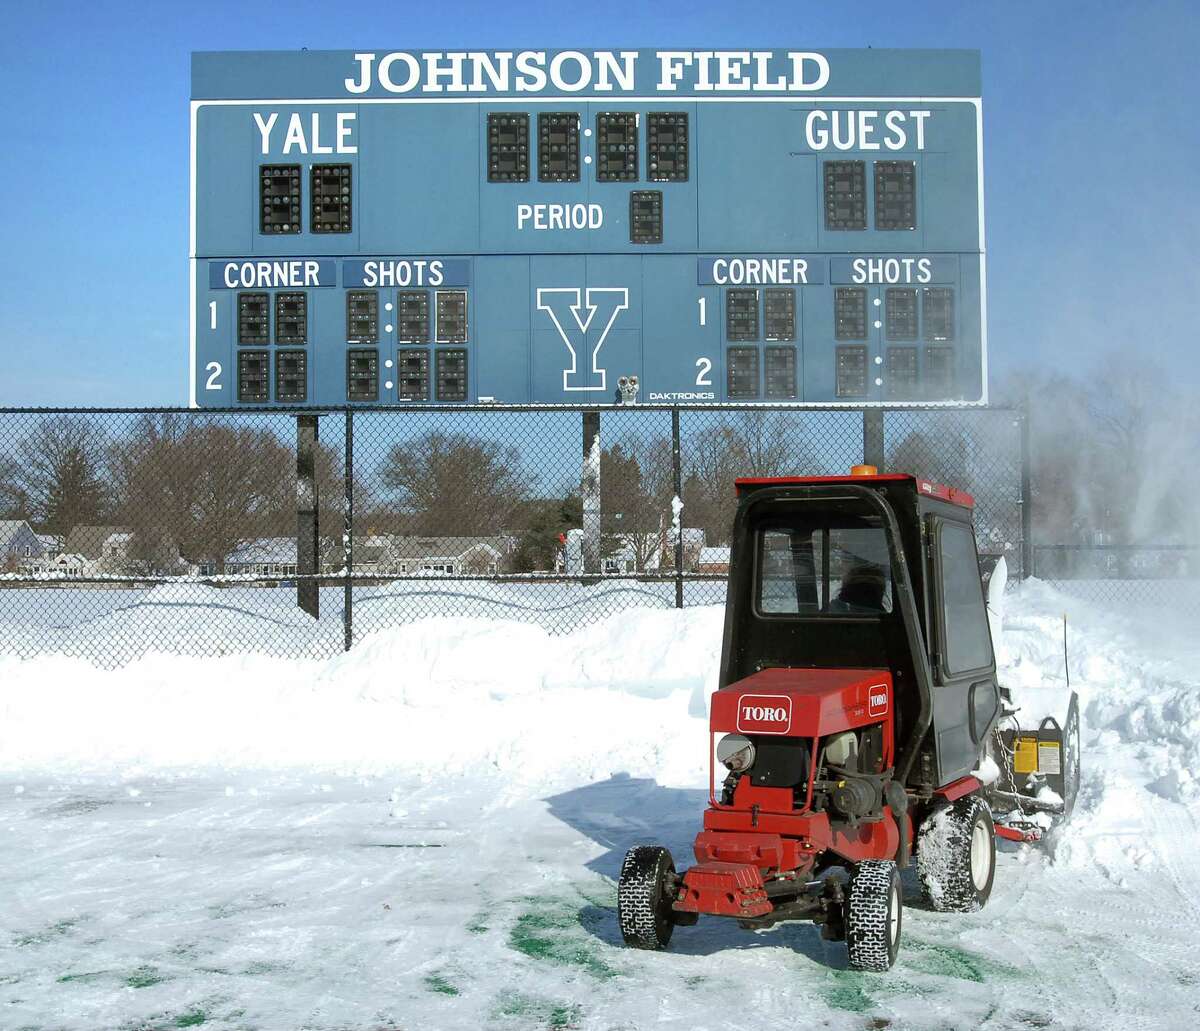 cit-enterprise-ag-1/21/09 Sue Imperati operates a snow thrower to clear snow from the edges of Johnson Field off of Central Ave. in New Haven on 1/21/2009. Photo by Arnold Gold AG0296D